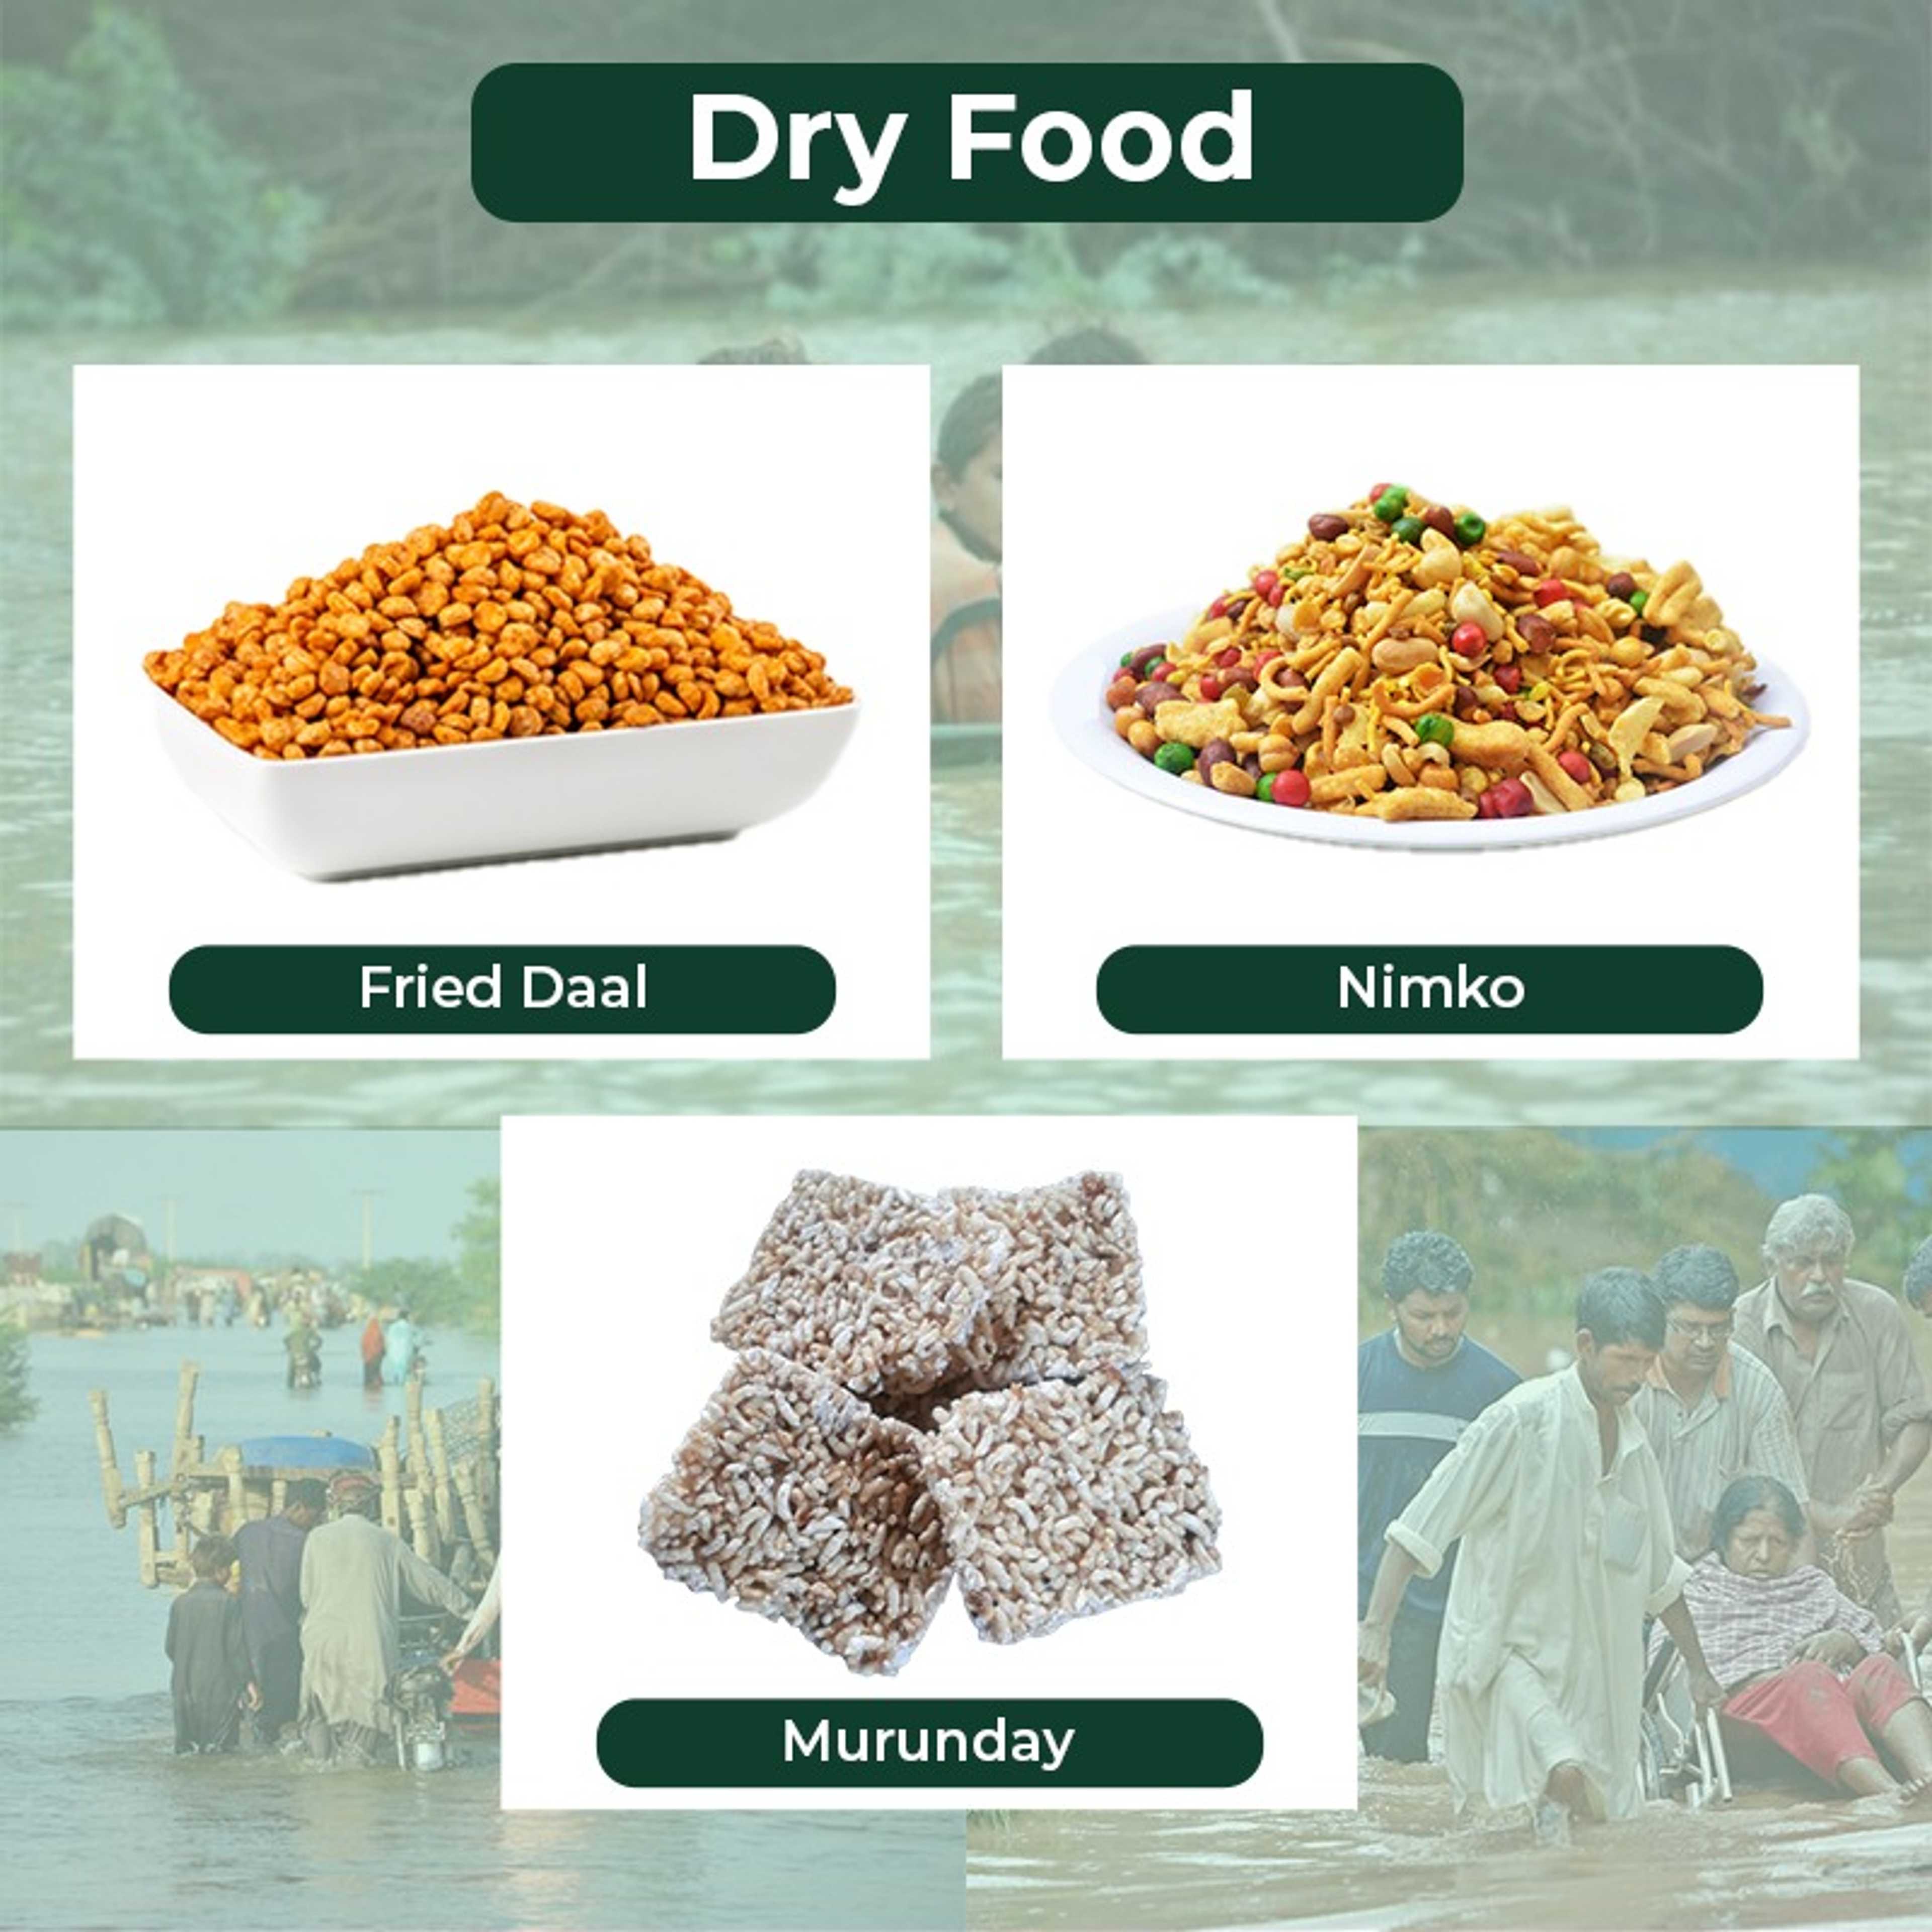 Dry Food - Fried Daal, Nimco and Murunday